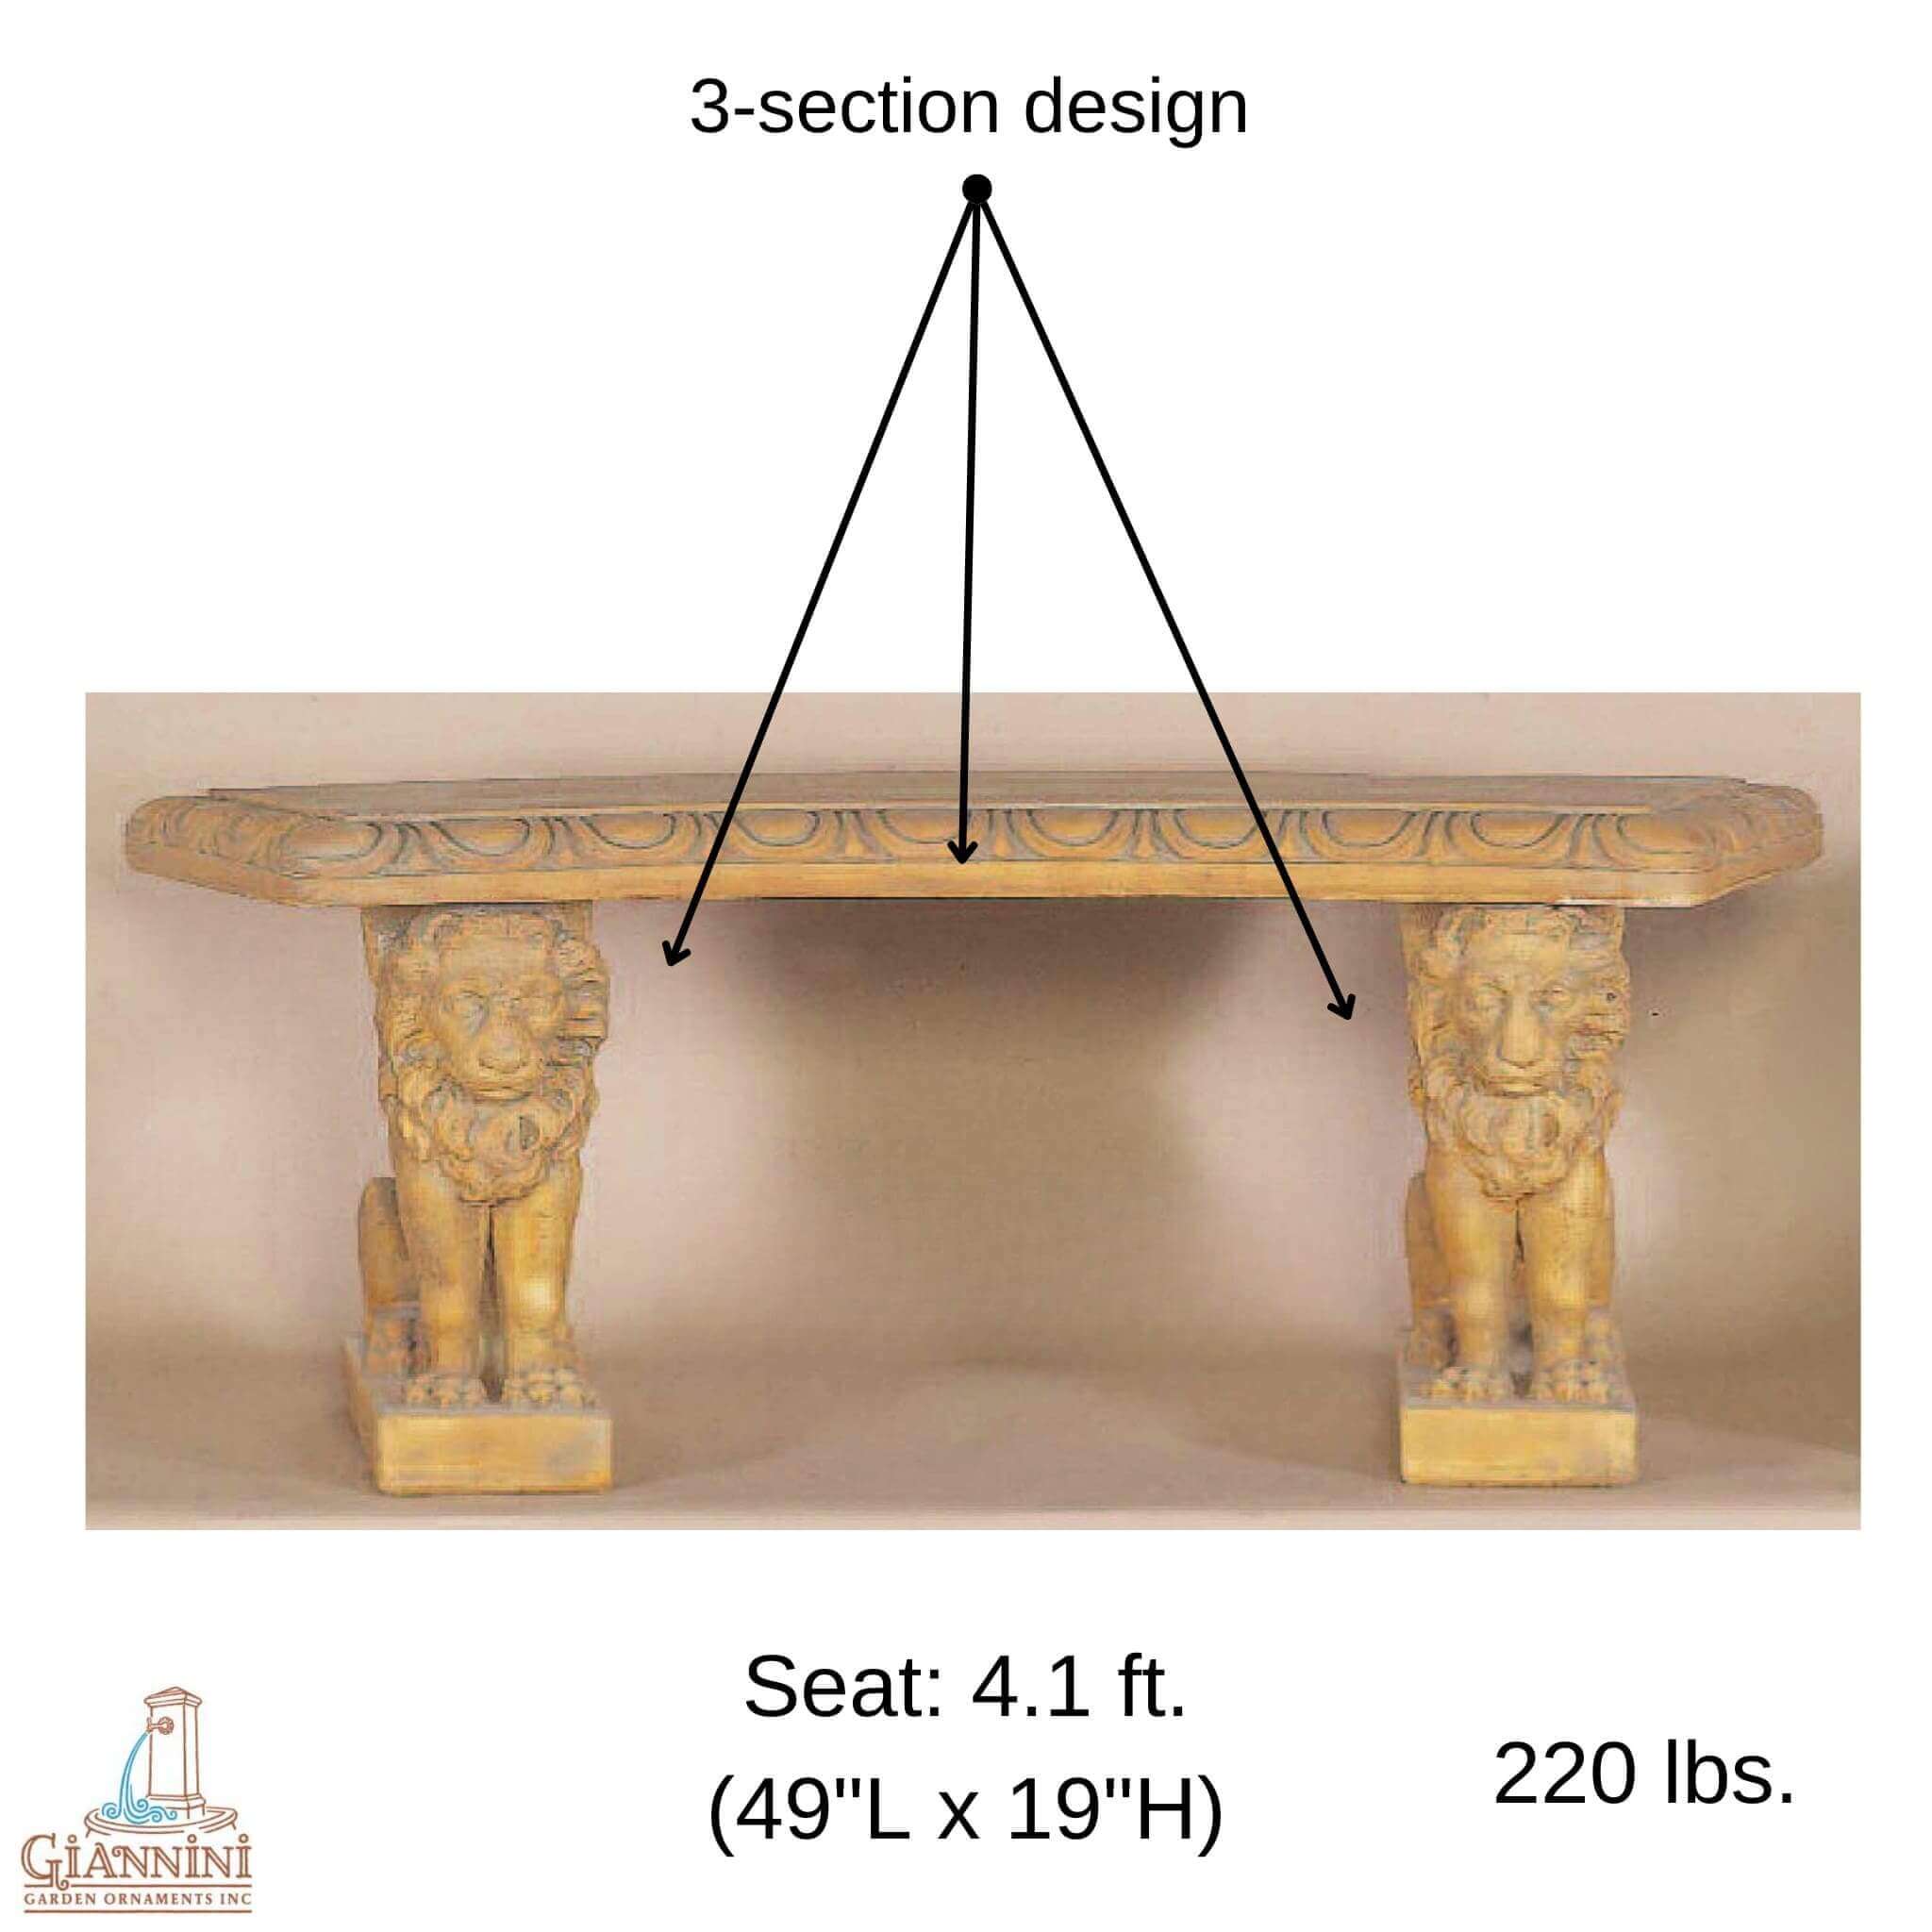 Venice Curved Concrete Garden Bench with Lion Legs - Giannini #516